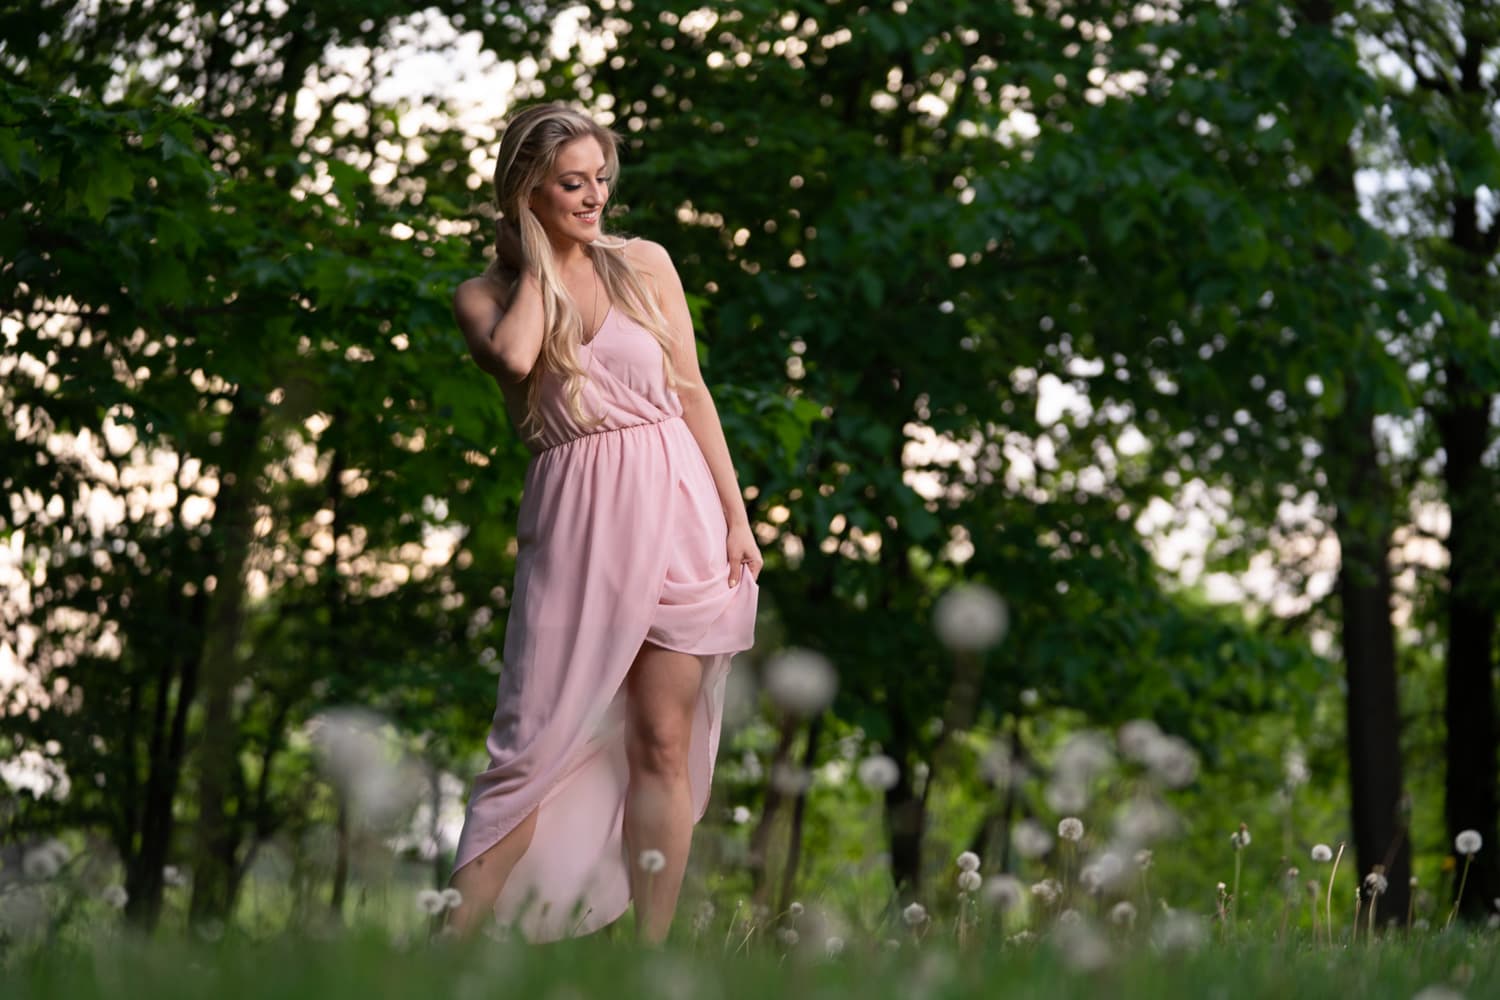  Blonde woman in pink dress standing in woods 